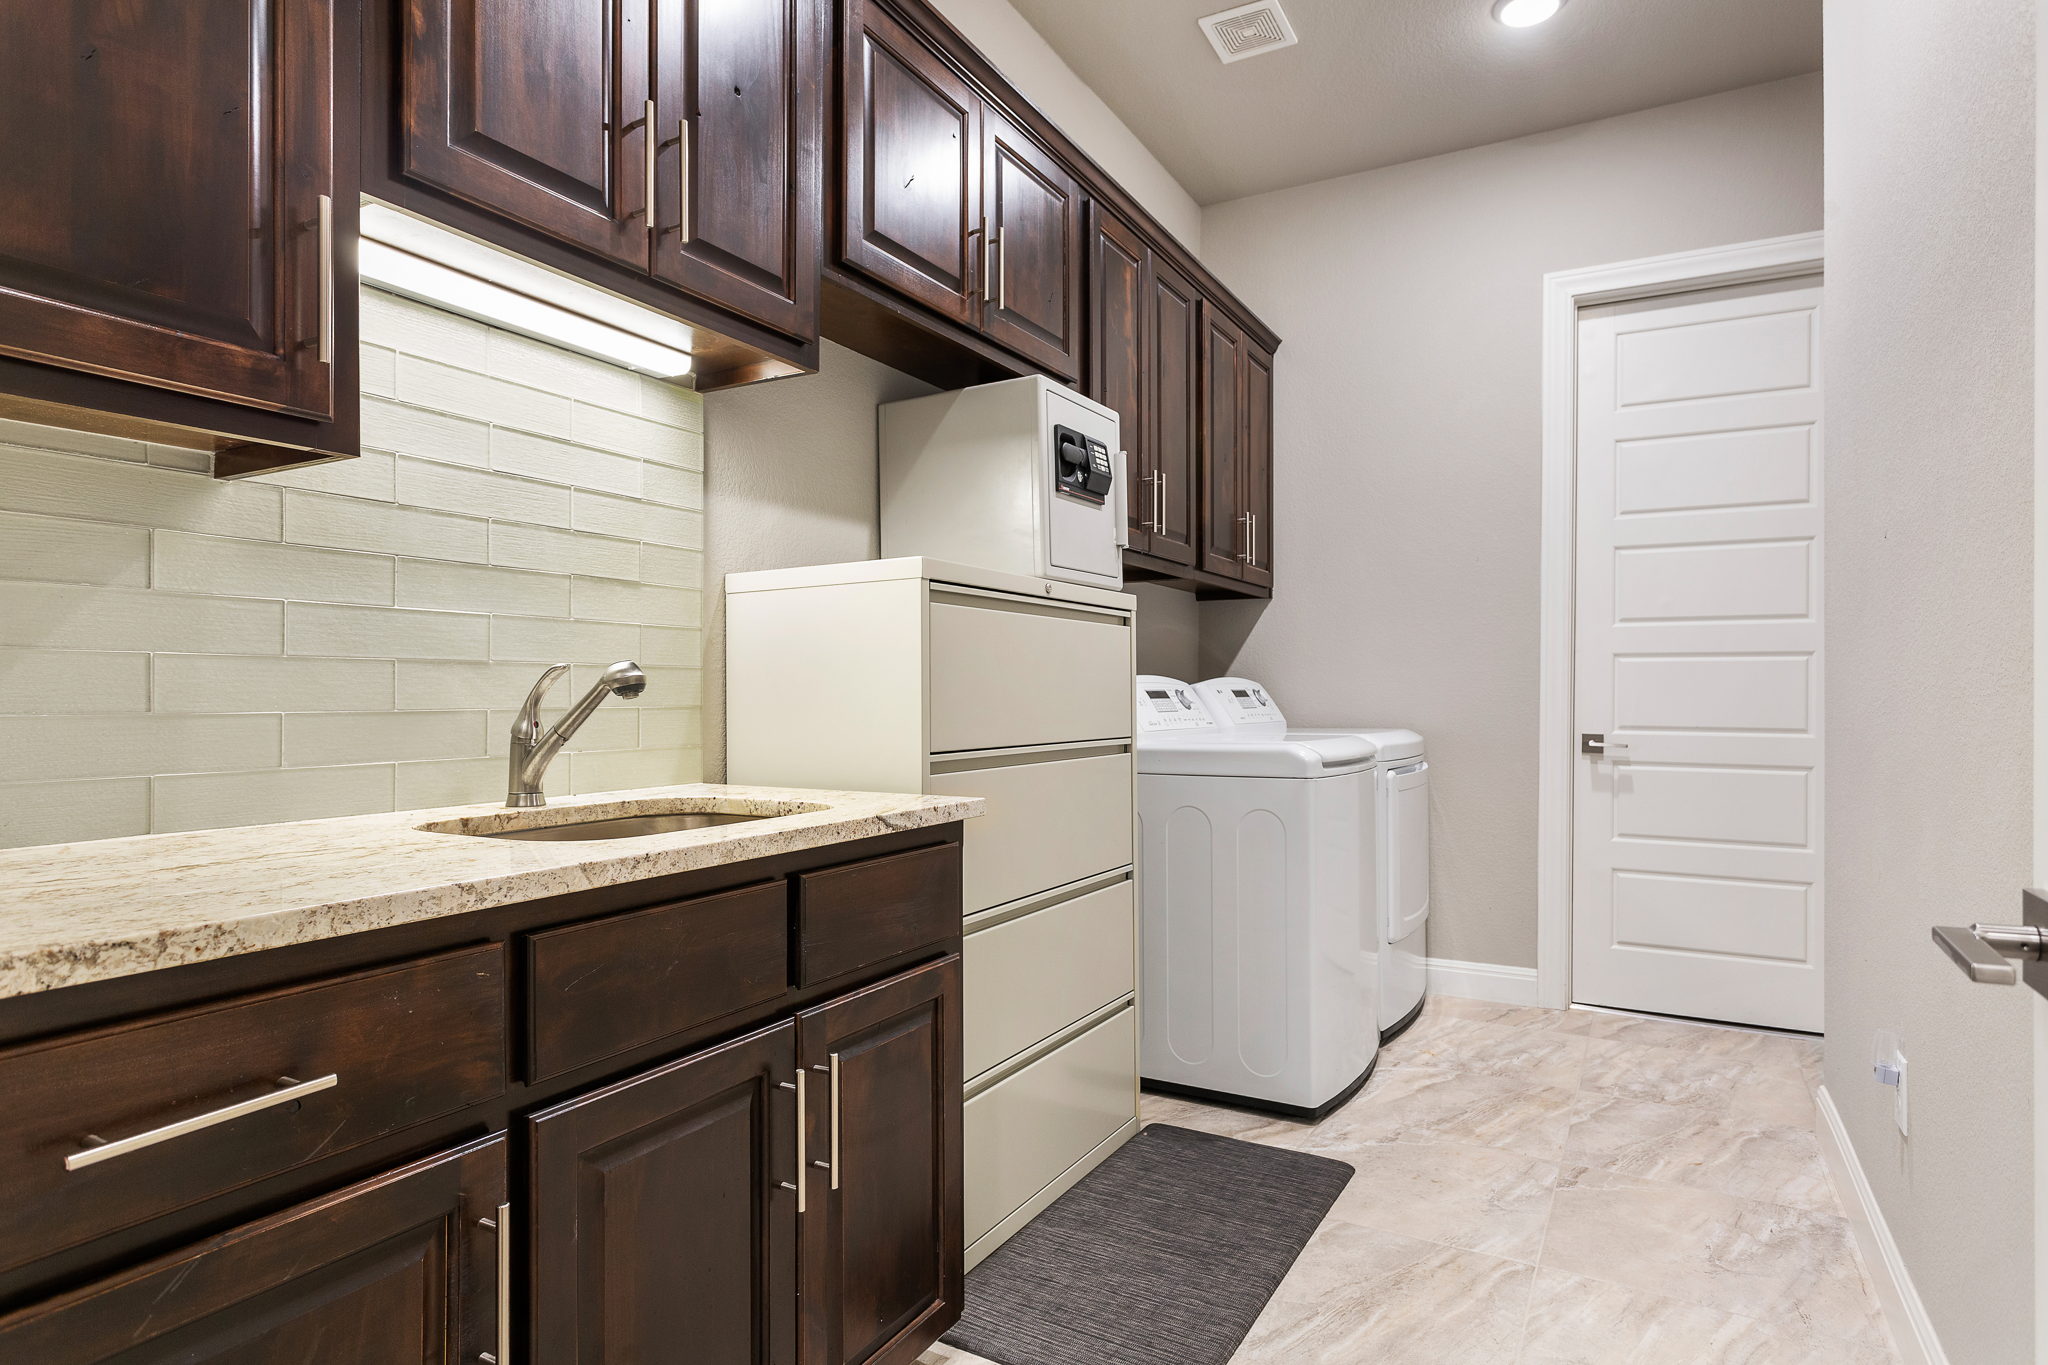 Large utility room with closet, sink with granite countertops and Knotty Alder cabinetry